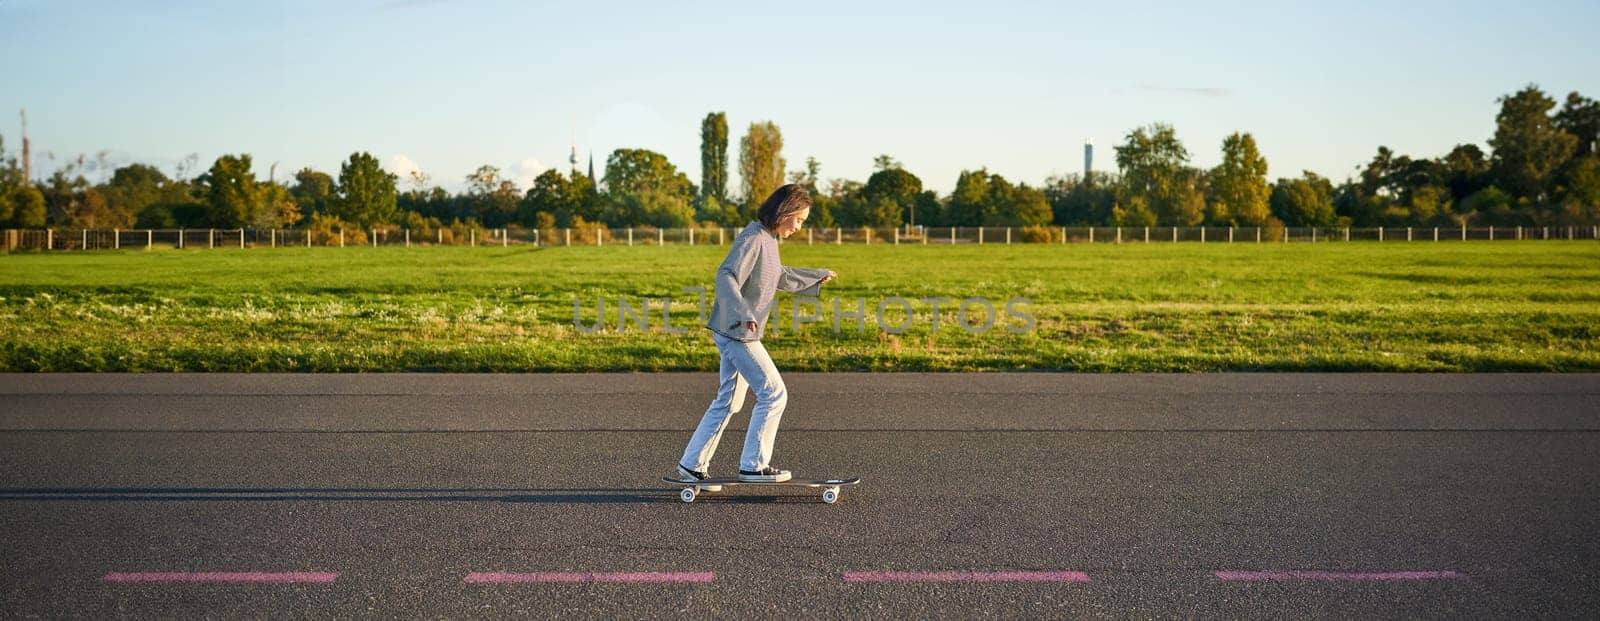 Hobbies and lifestyle. Young woman riding skateboard. Skater girl enjoying cruise on longboard on sunny day outdoors.